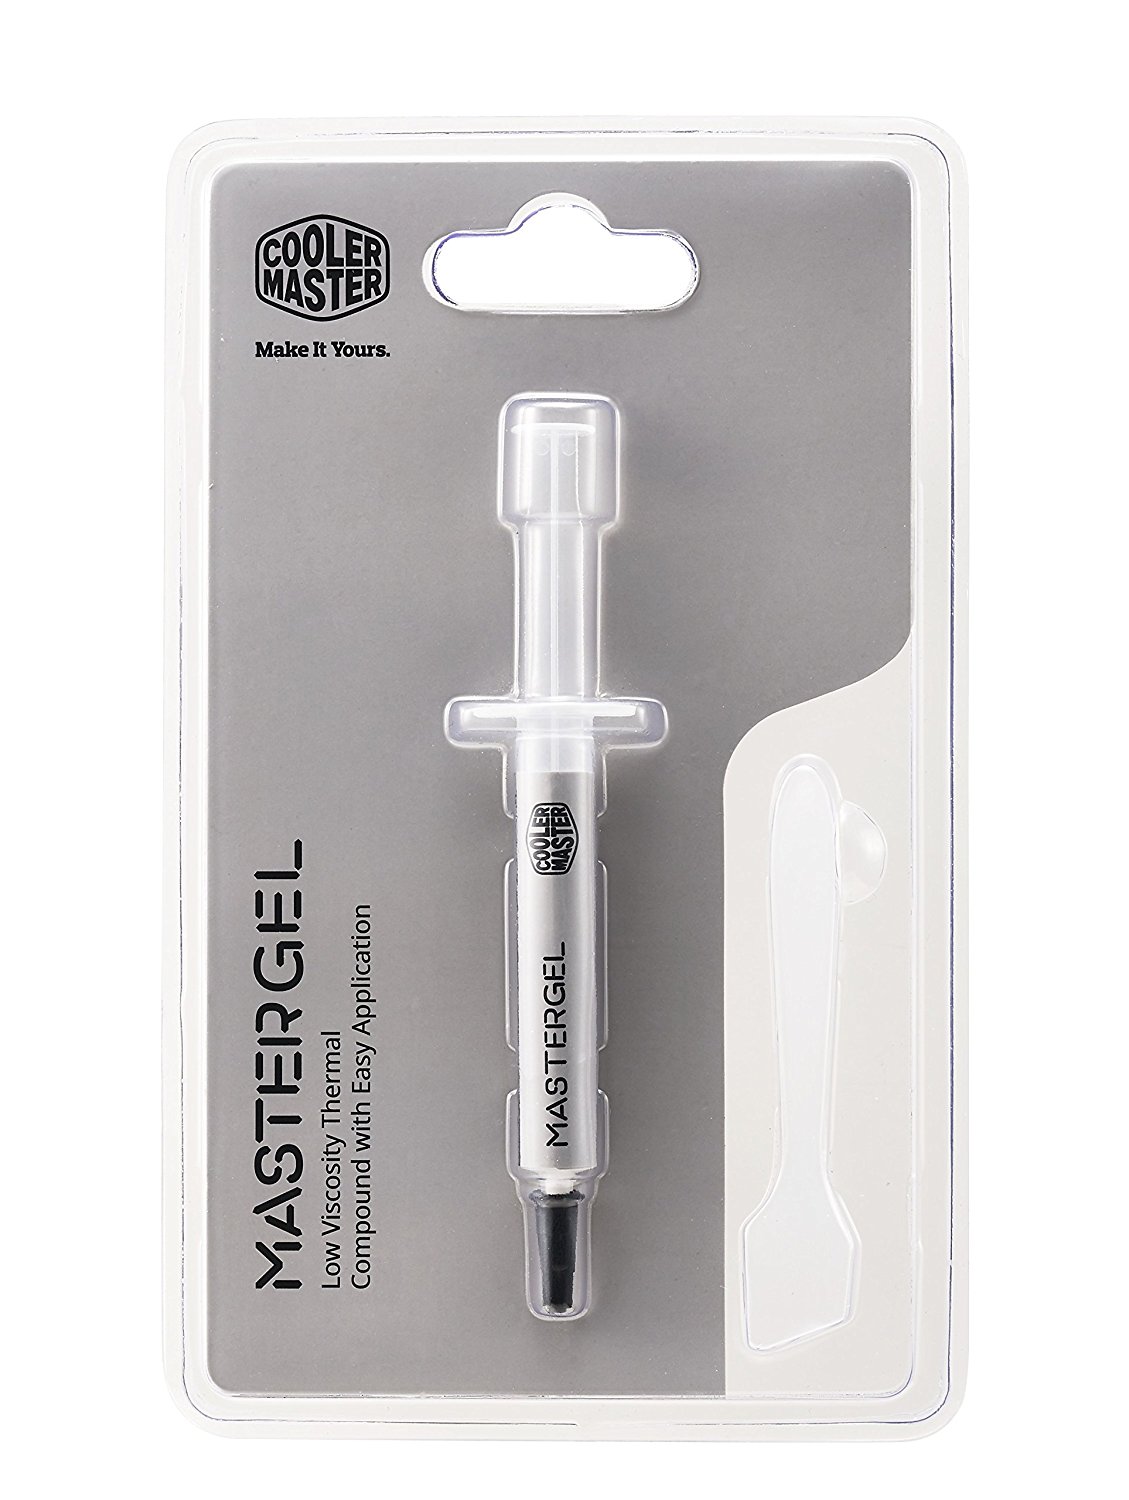 Cooler Master MasterGel Thermal Compound Grease Paste - MGX-ZOSW-N15M-R1 Price in India